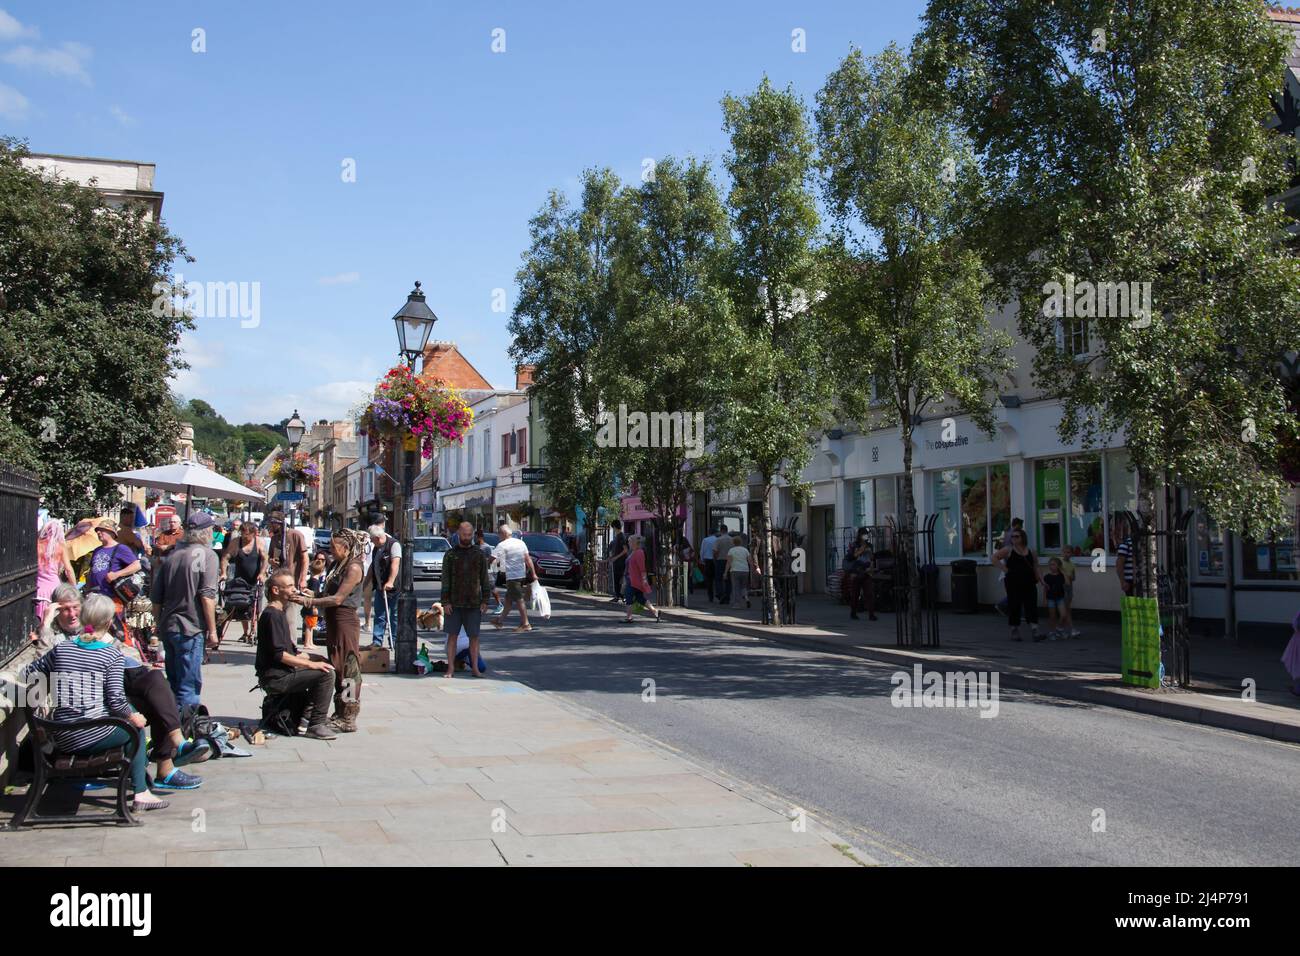 Views of people on the High Street in Glastonbury, Somerset in the UK Stock Photo